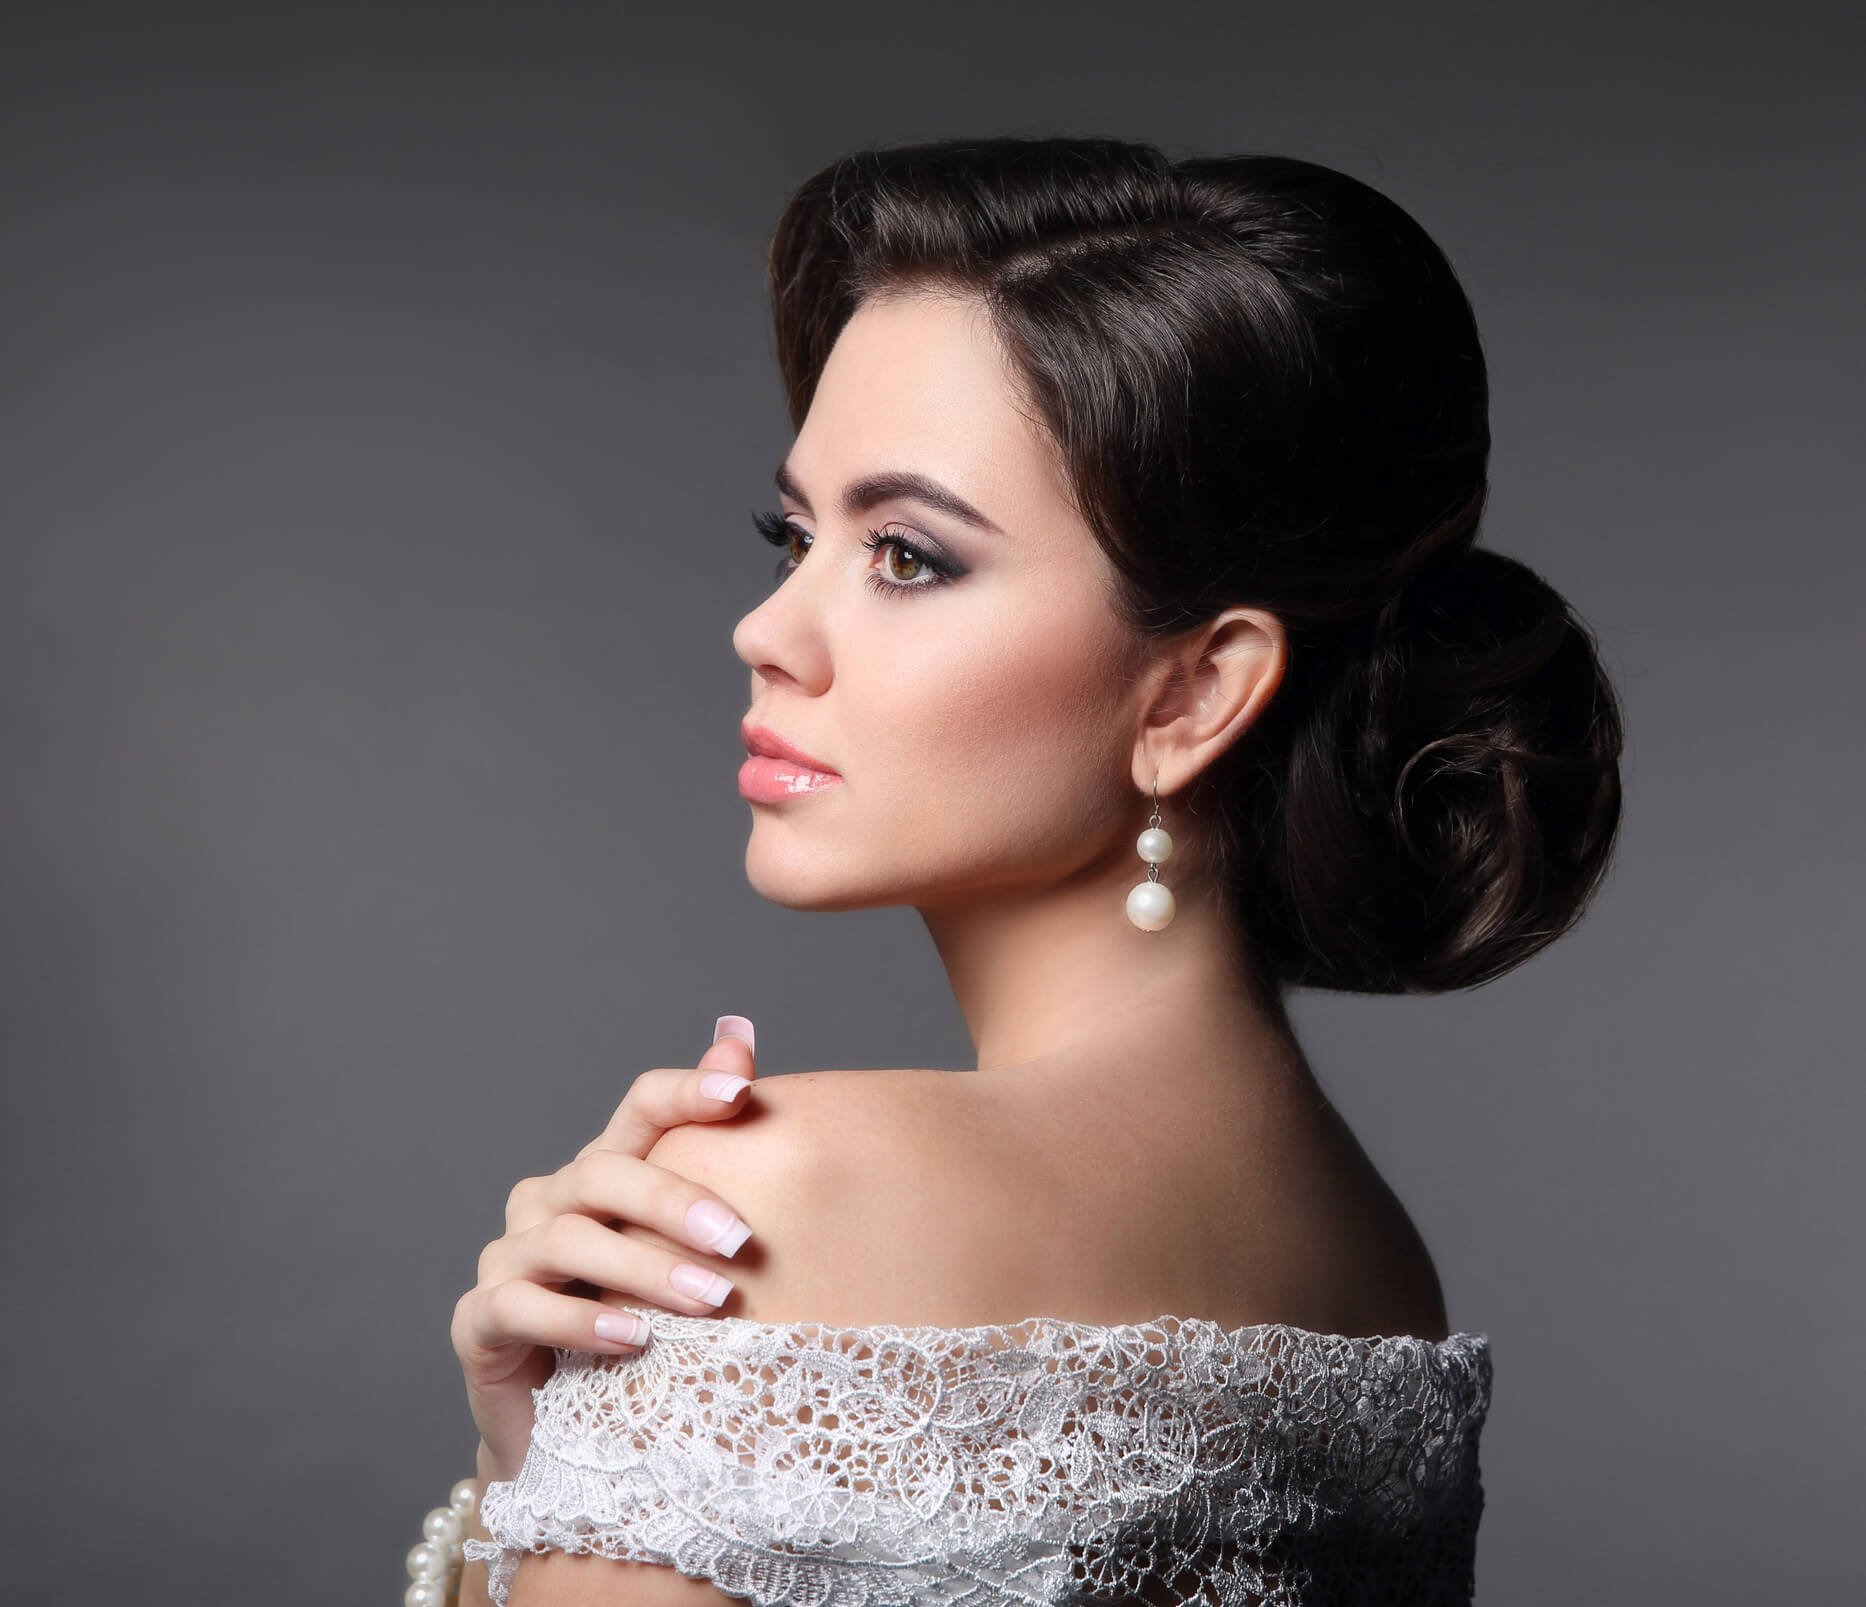 Image of a young woman with styled hair and makeup